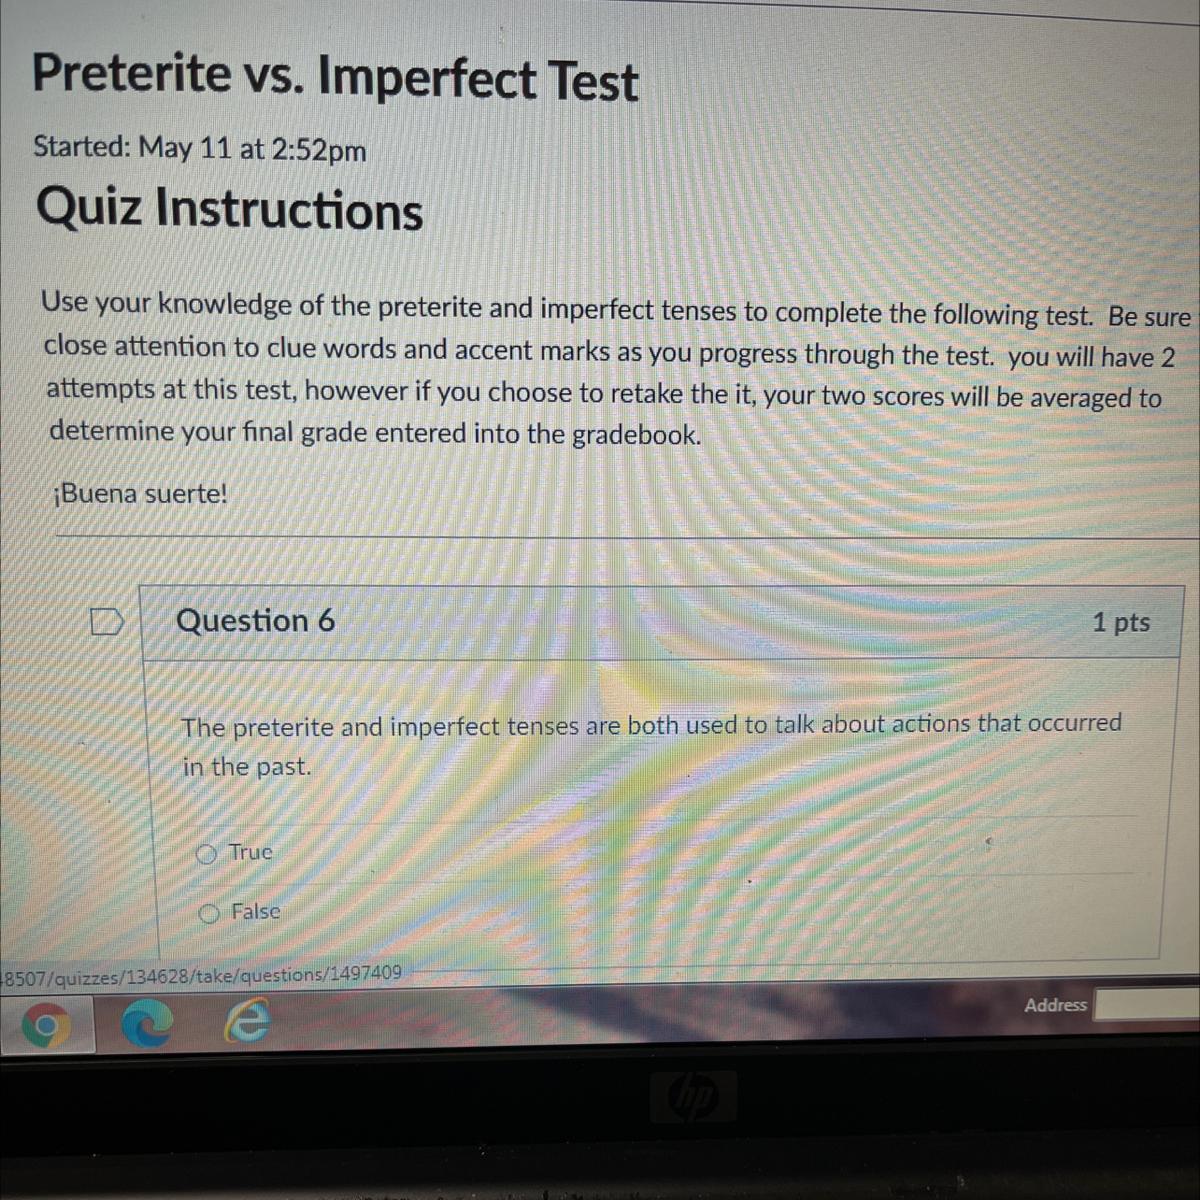 Question 61 PtsThe Preterite And Imperfect Tenses Are Both Used To Talk About Actions That Occurredin